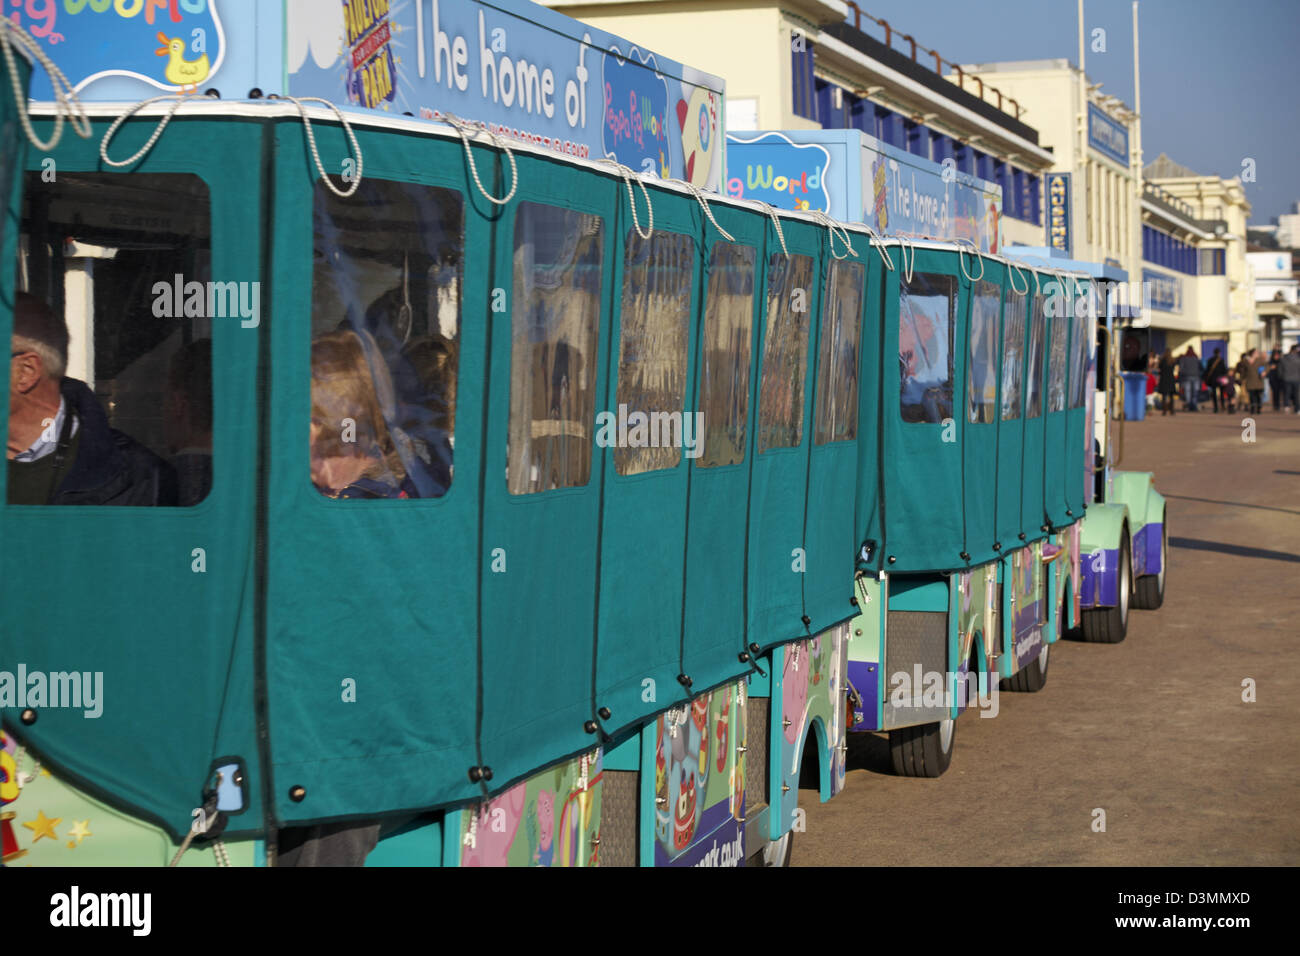 The home of Peppa Pig world - Landtrain taking passengers along the promenade at Bournemouth in February Stock Photo